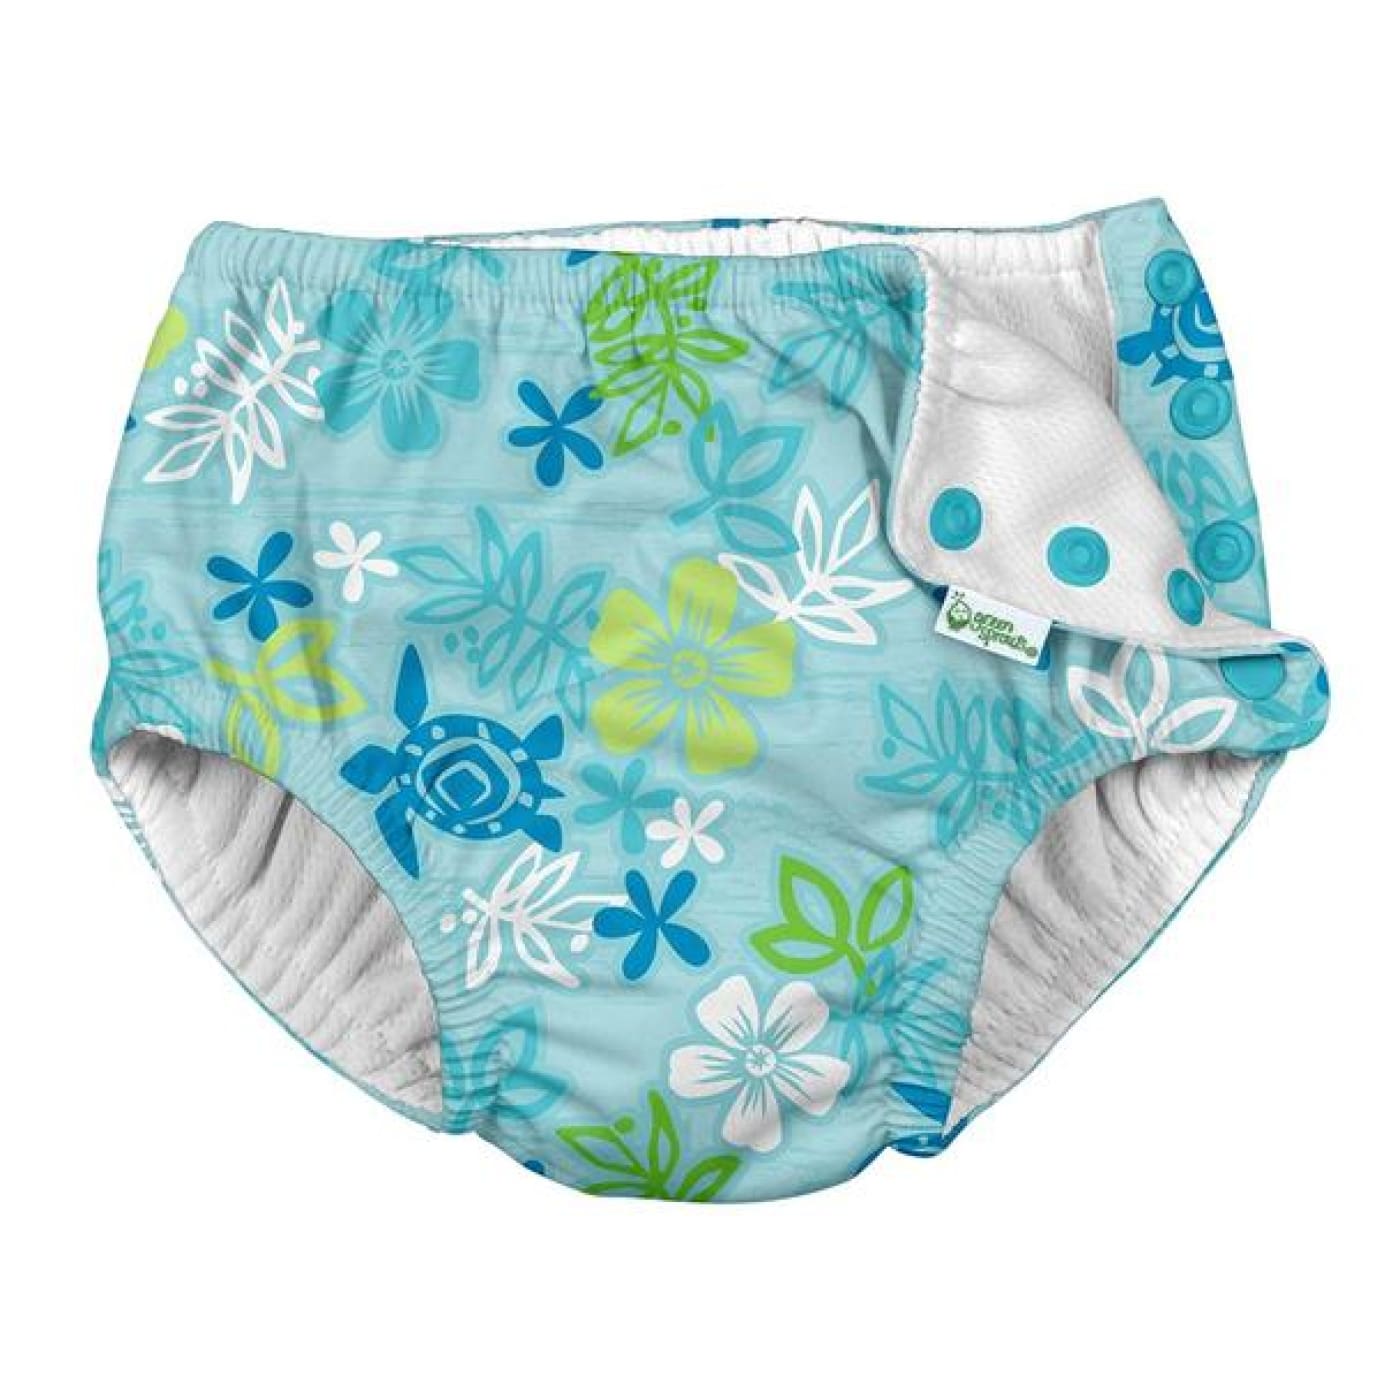 i play Snap Reusable Absorbent Swimsuit Diaper 6M - Aqua Hawaiin Turtle - BABY & TODDLER CLOTHING - SWIMMERS/ACCESSORIES